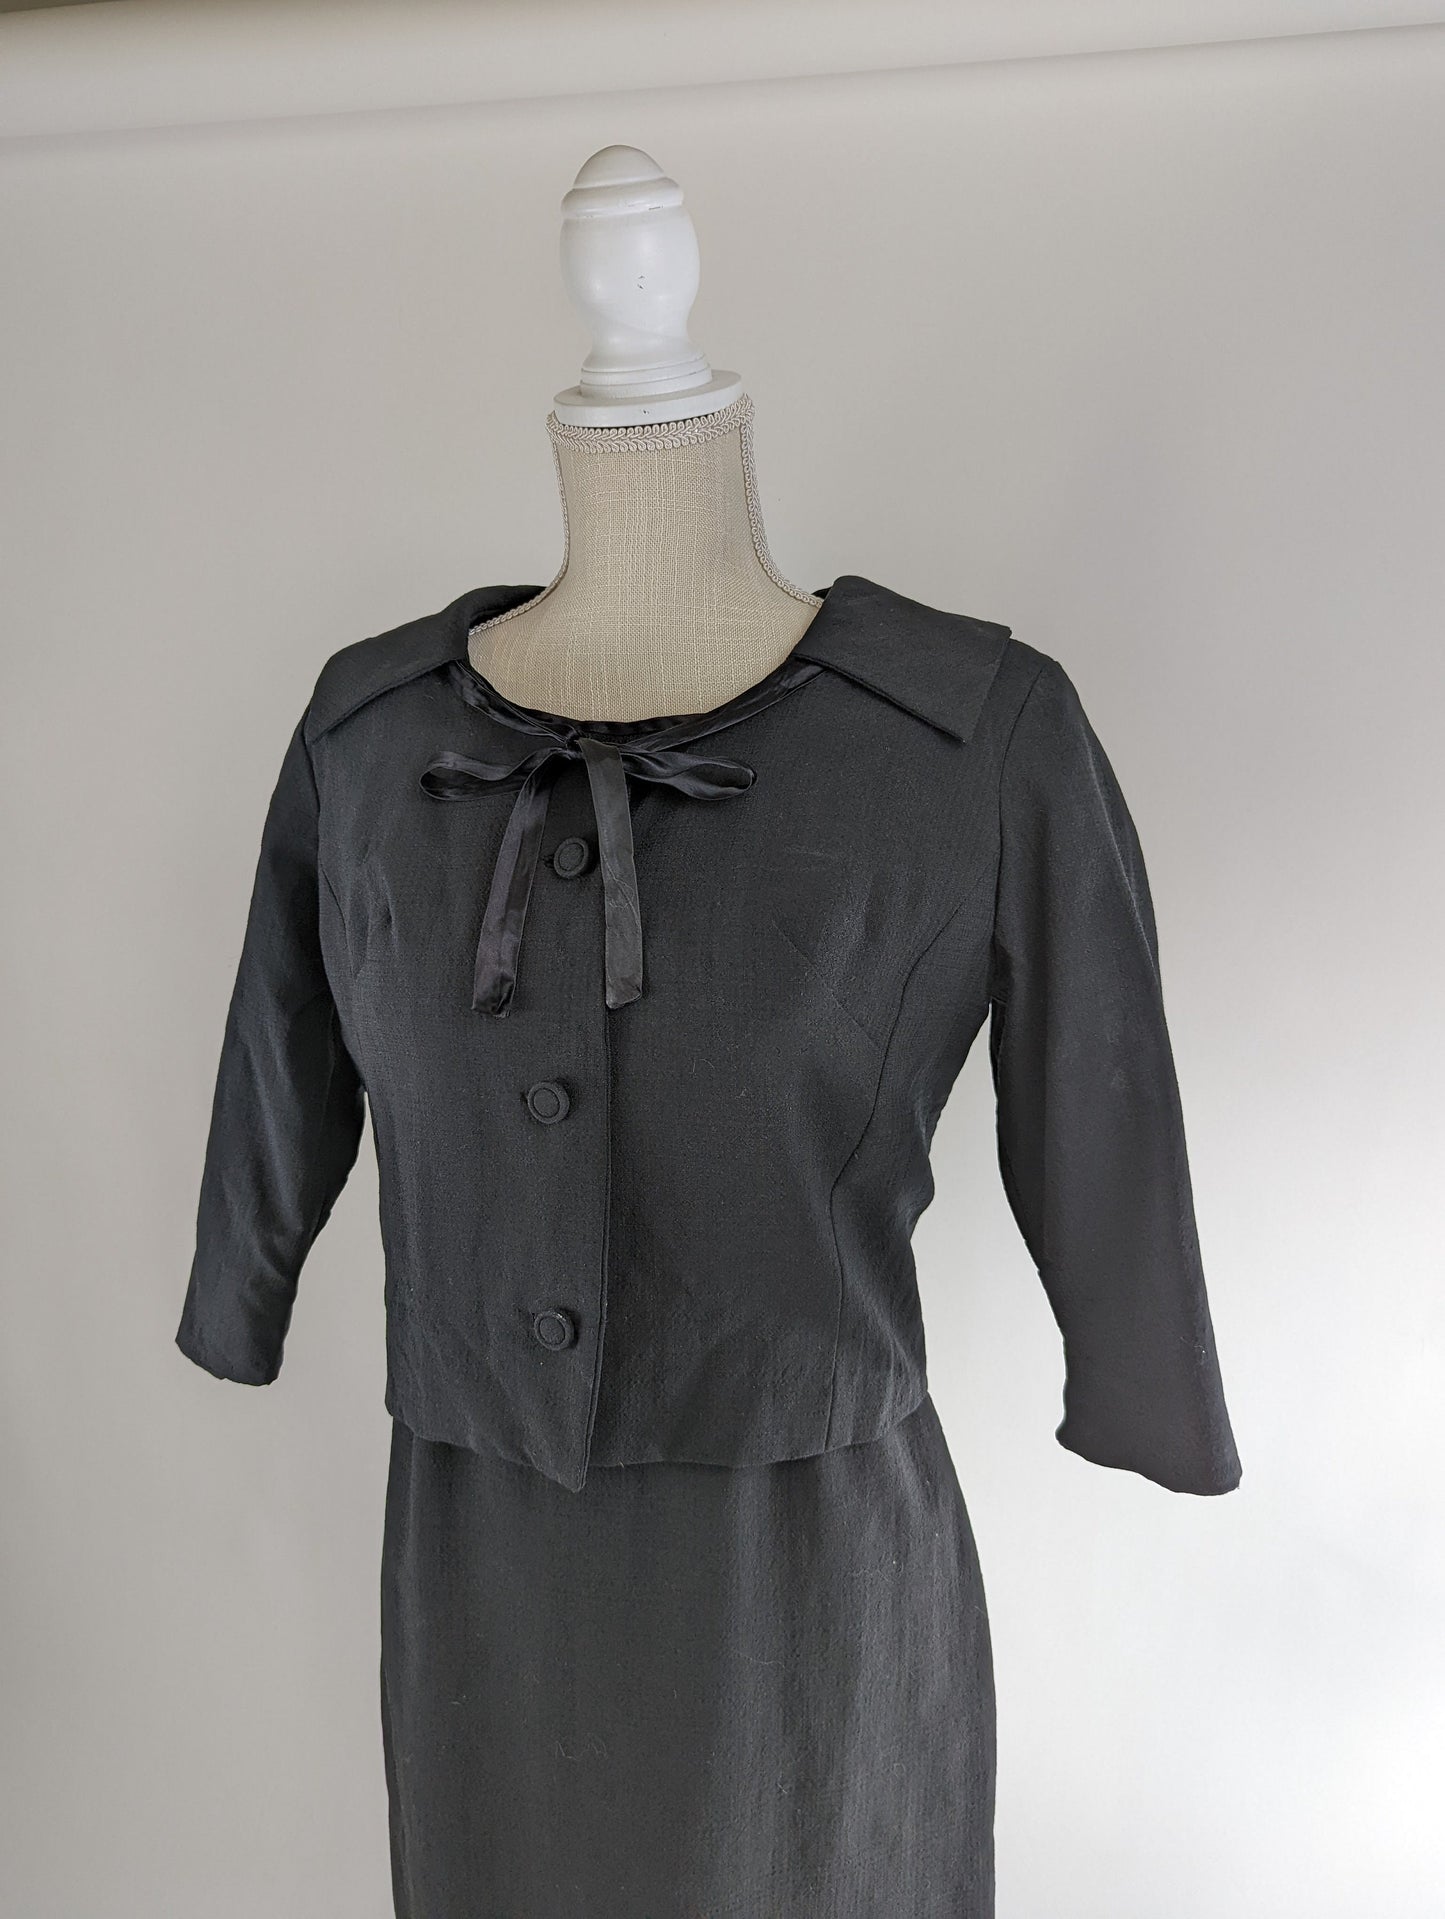 1960s Two Piece Black Dress and Crop Jacket with Satin Ribbon and Rounded Collar and Silk Lining